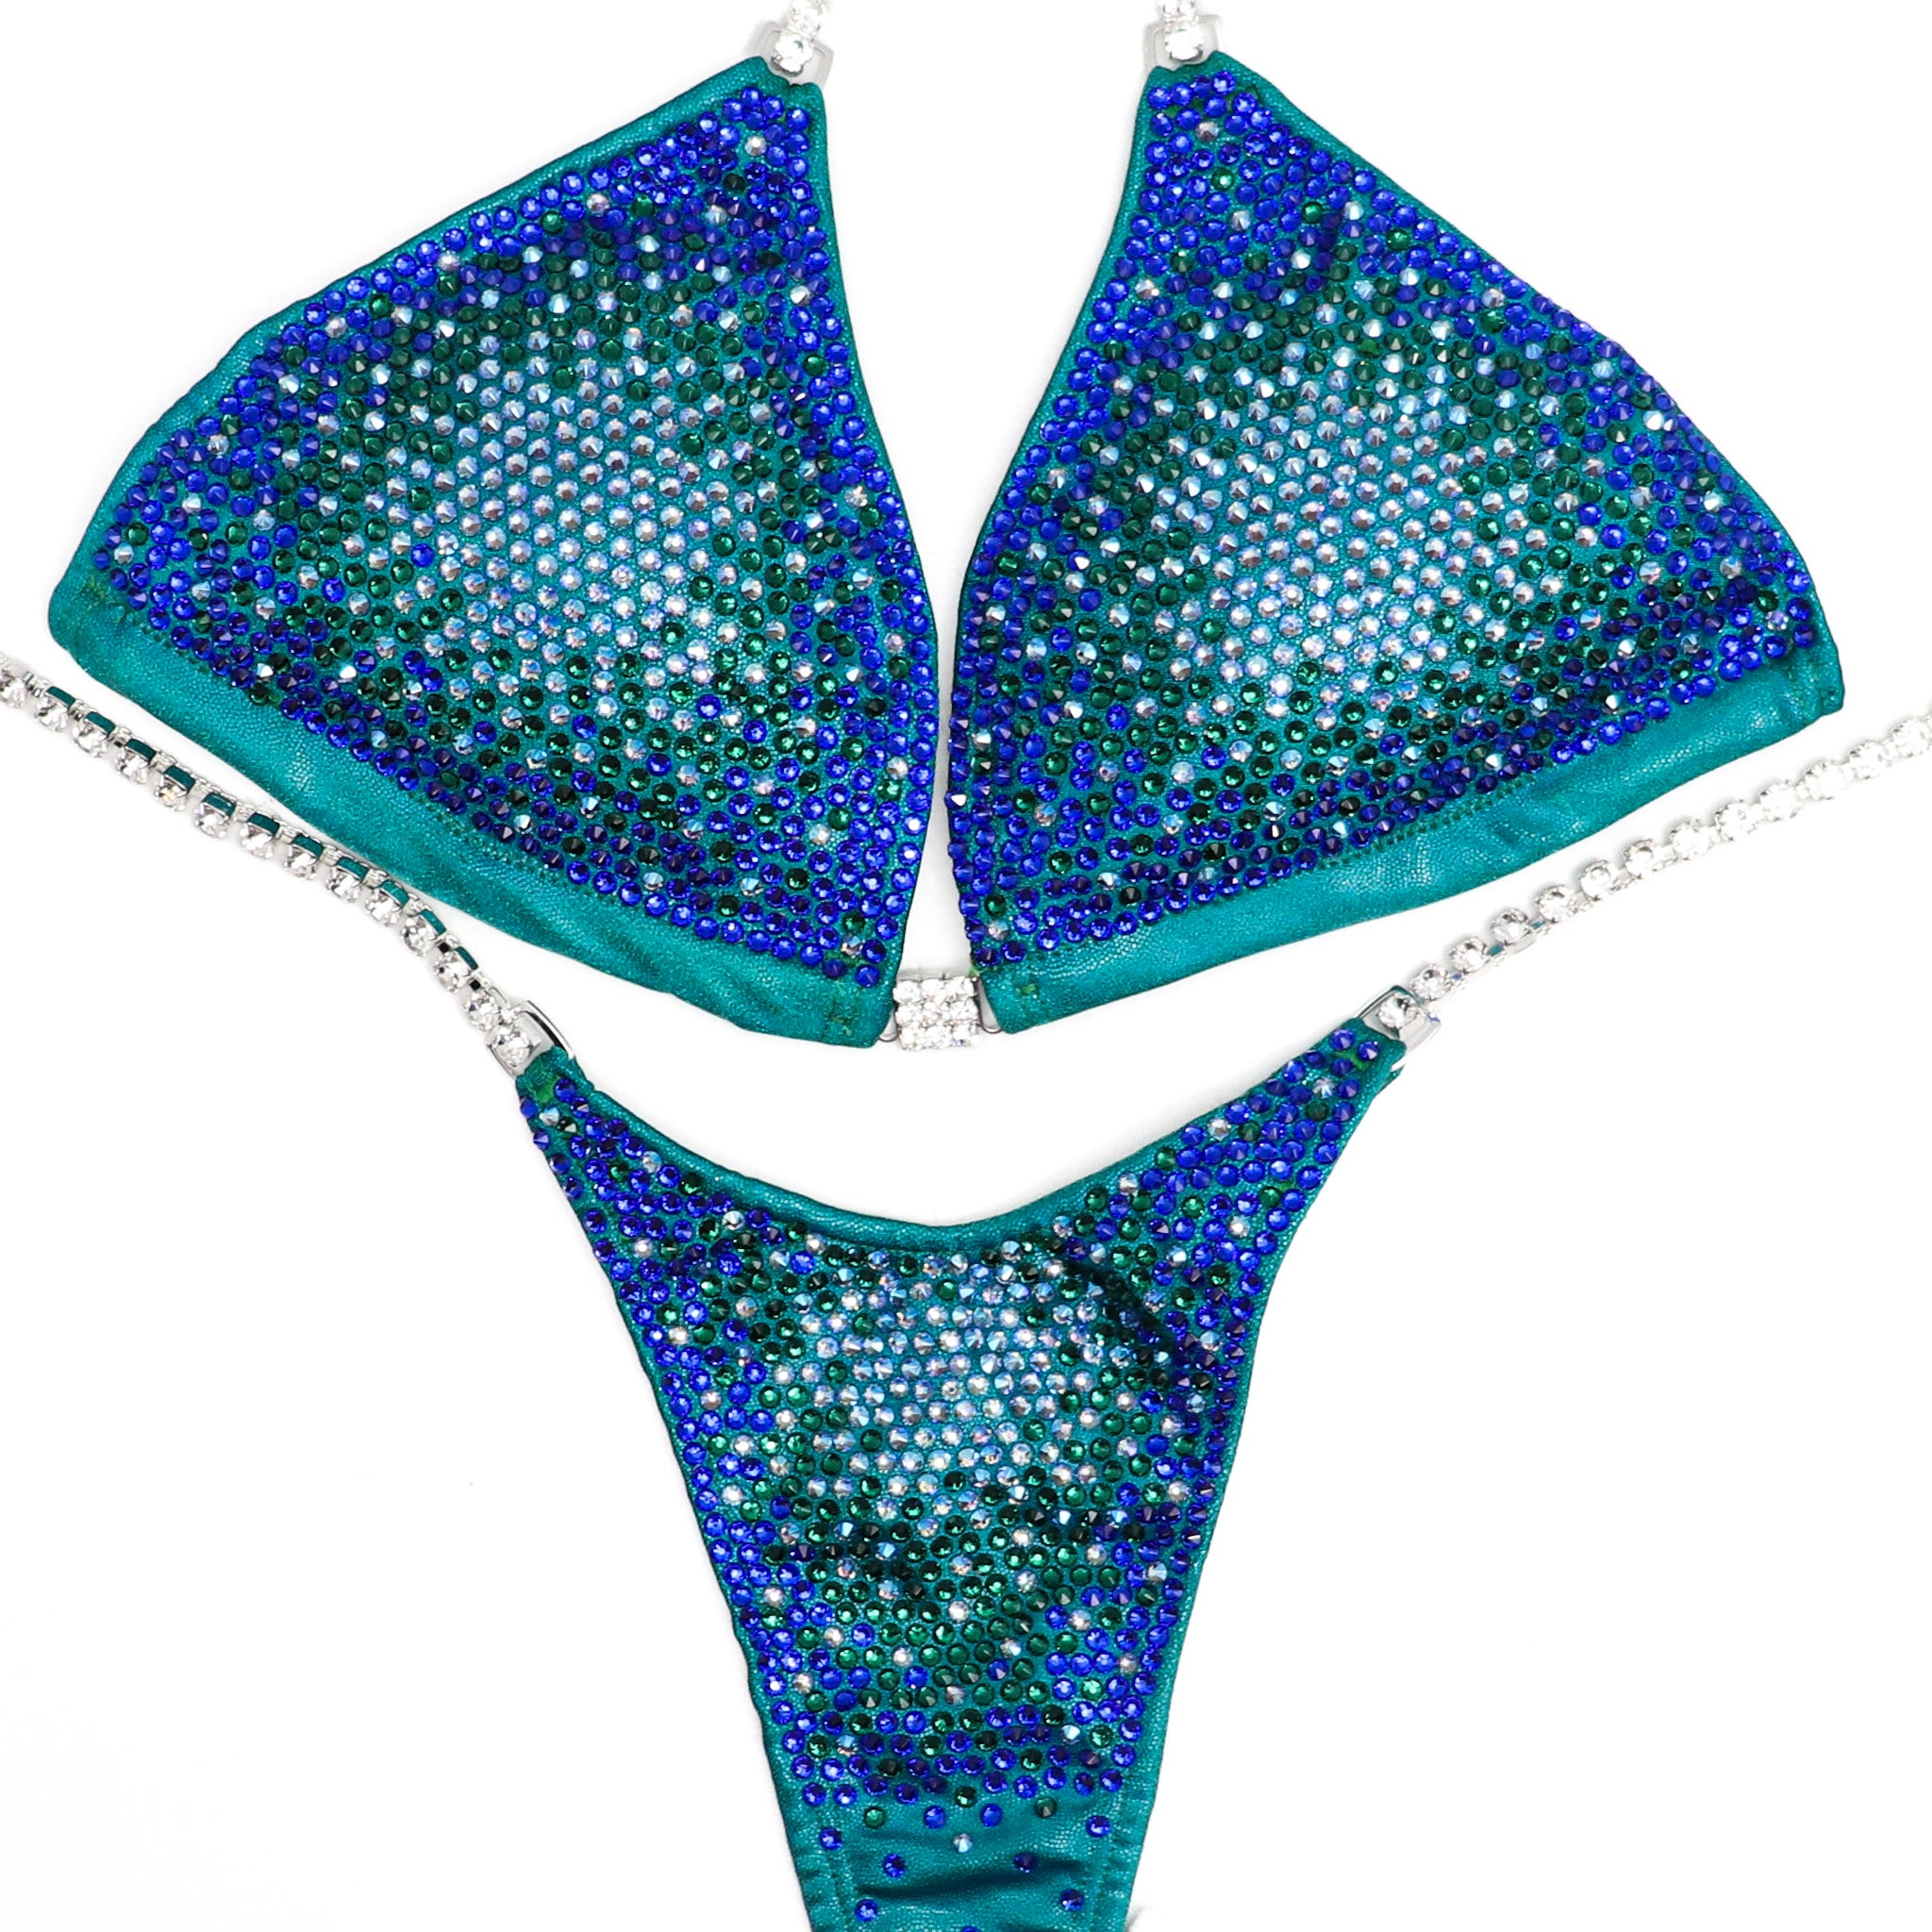 The Planet Earth Nova competition suit, designed for NPC Bikini competitors seeking the pinnacle of performance and style. Crafted with precision and inspired by Ashley Kaltwasser, this suit embodies elegance and strength. Dominate the stage with confidence in this unparalleled fusion of beauty and functionality.